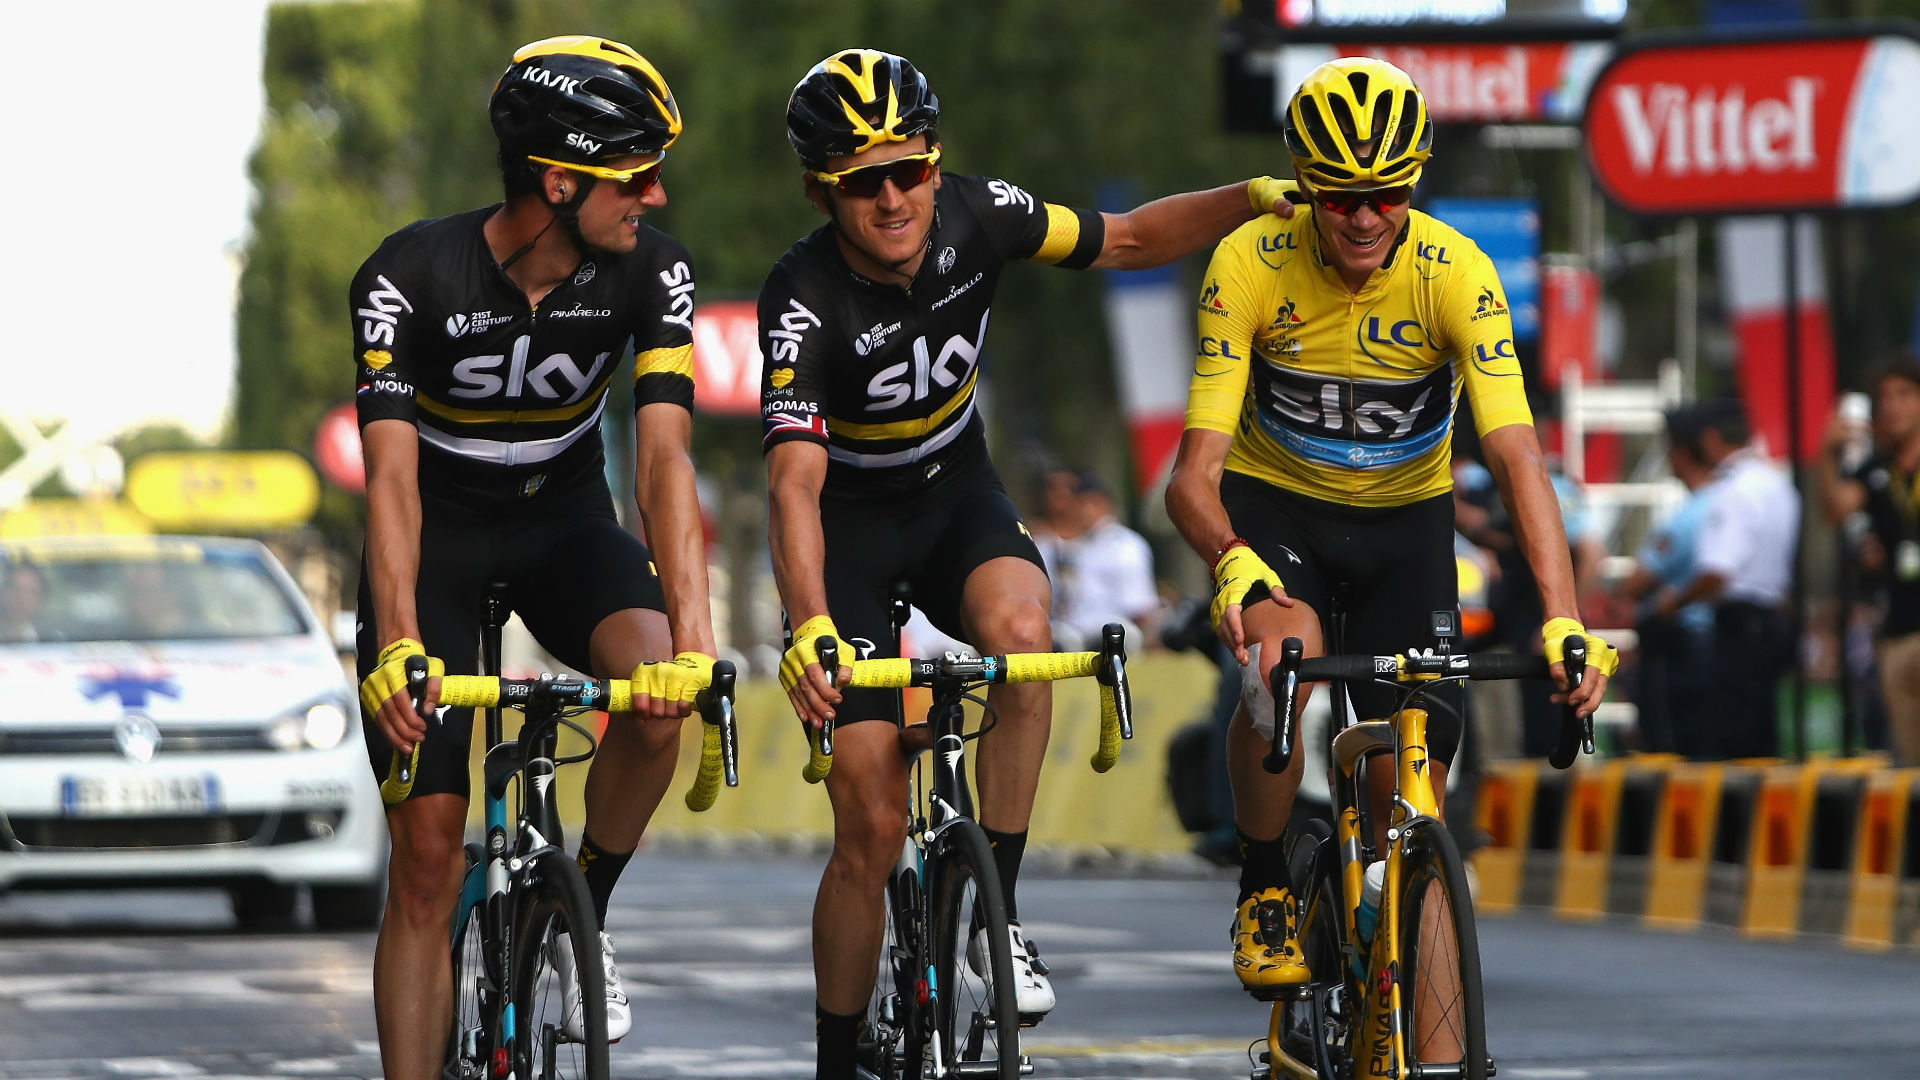 Dave Brailsford says Team Sky will look to continue after 2019 despite Sky opting to end their involvement in the UCI World Tour.